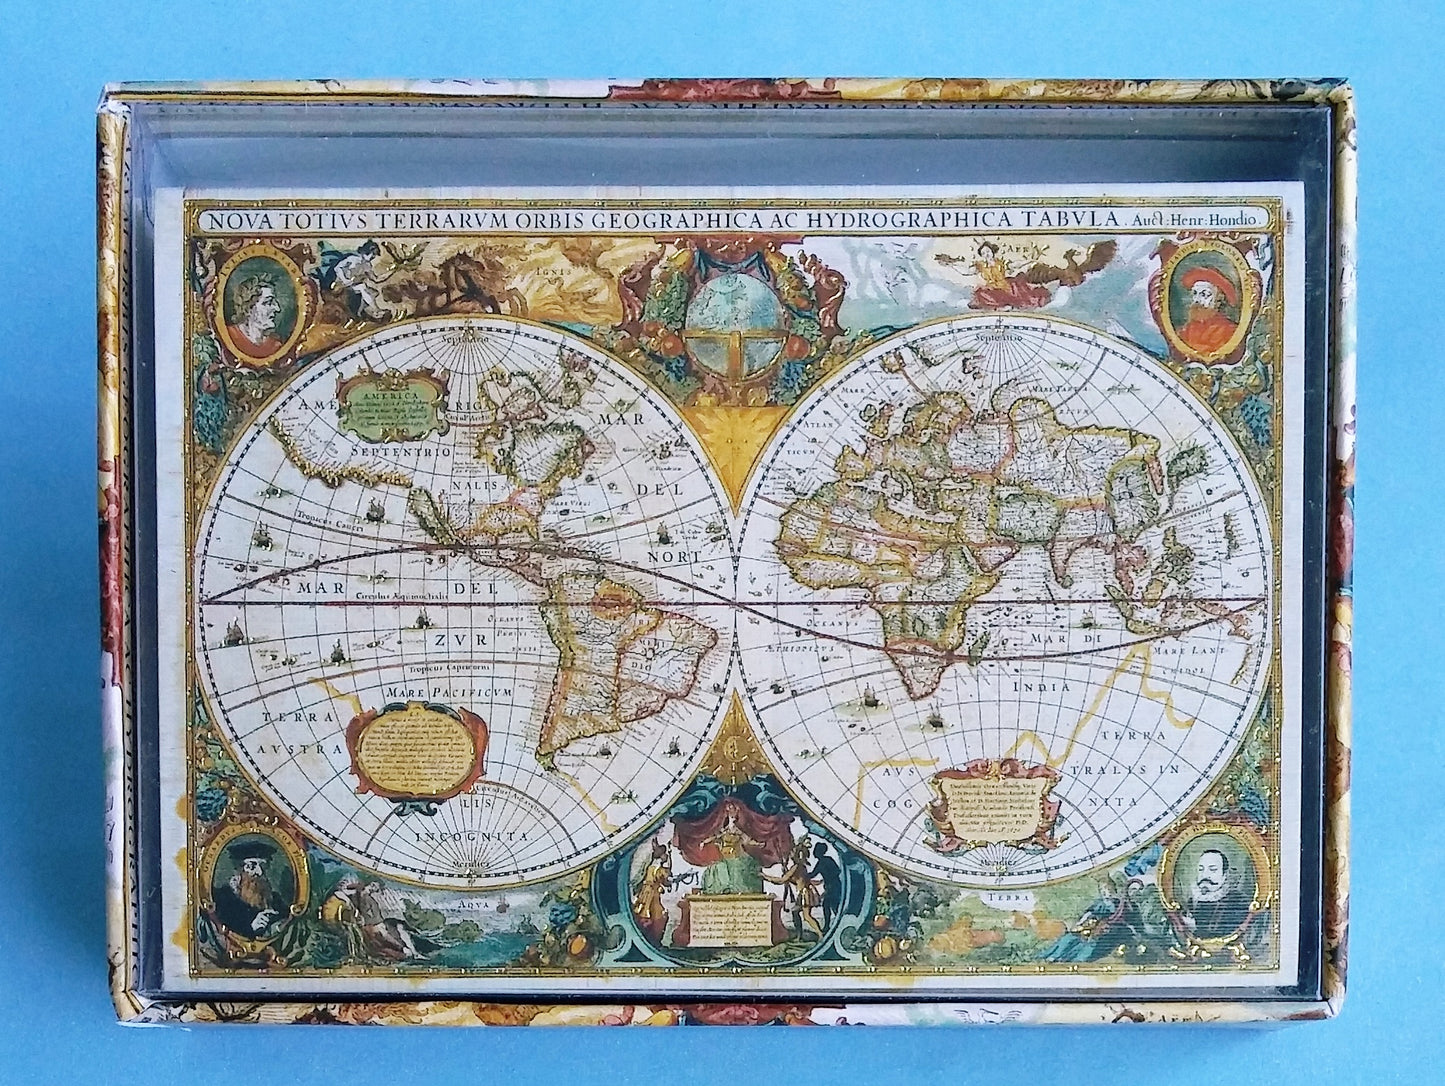 Boxed Note Cards | OLD WORLD MAP #317353-2